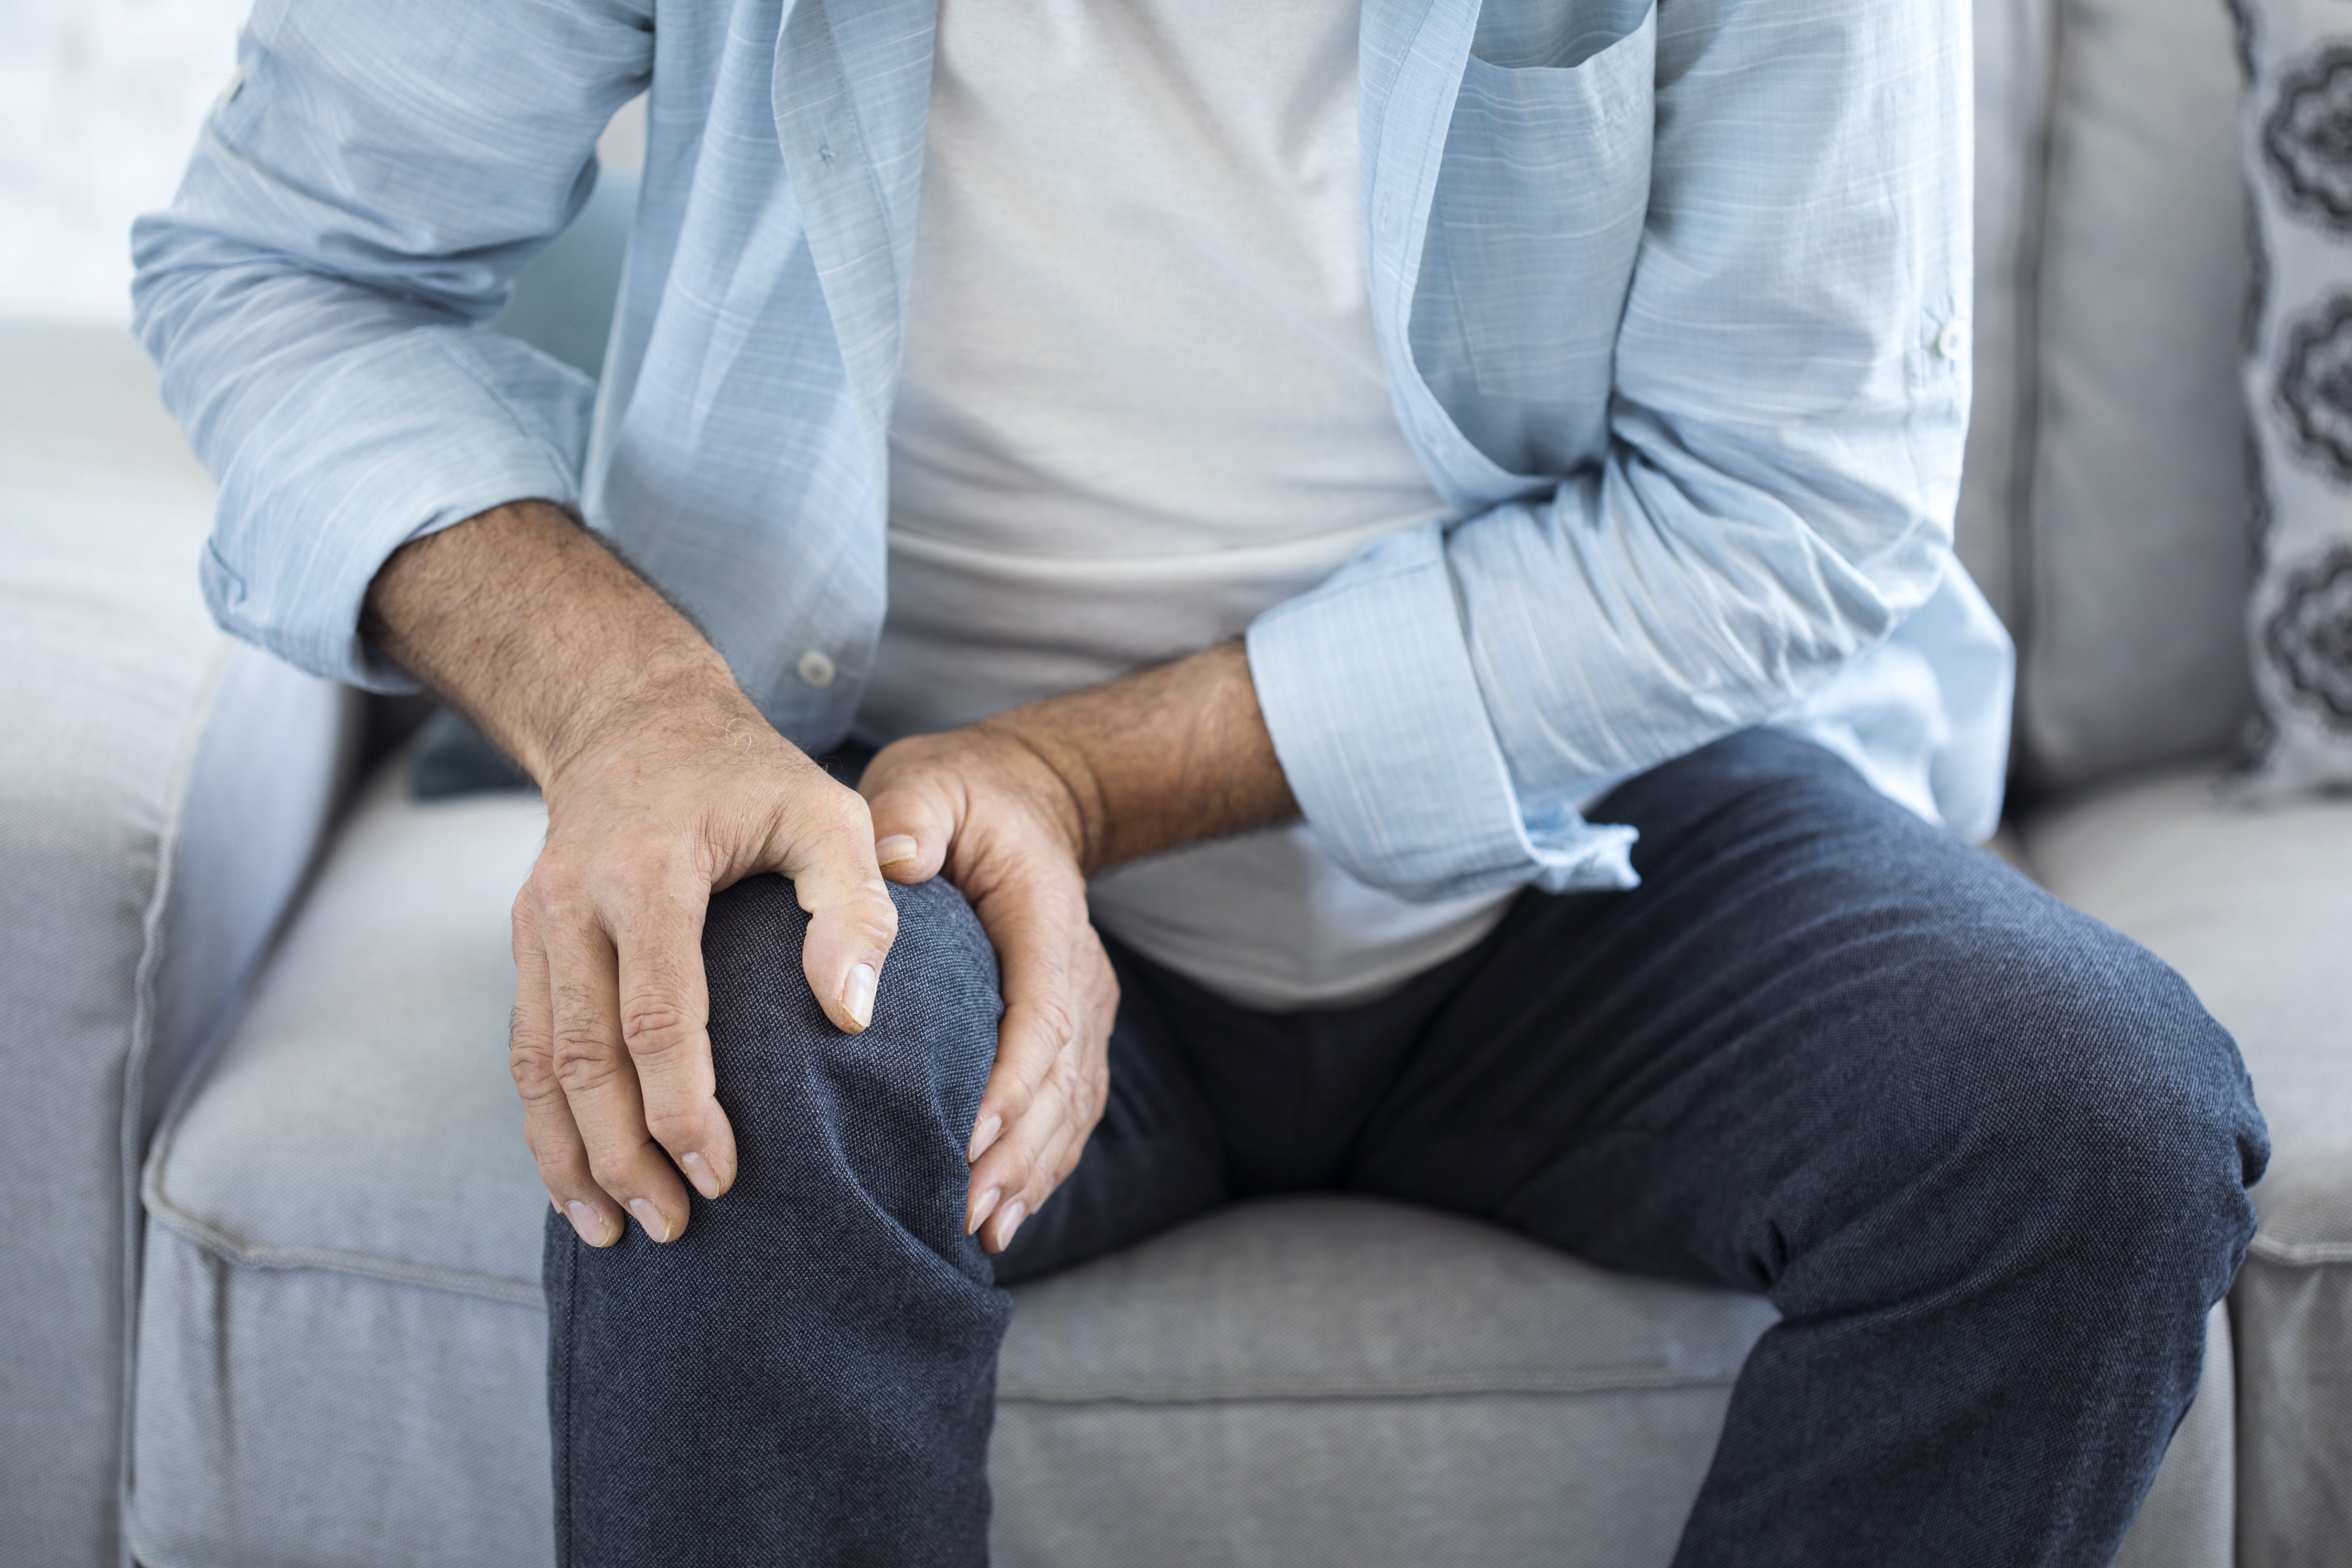 How Chiropractic Care Can Relieve Knee Pain in Cold Weather